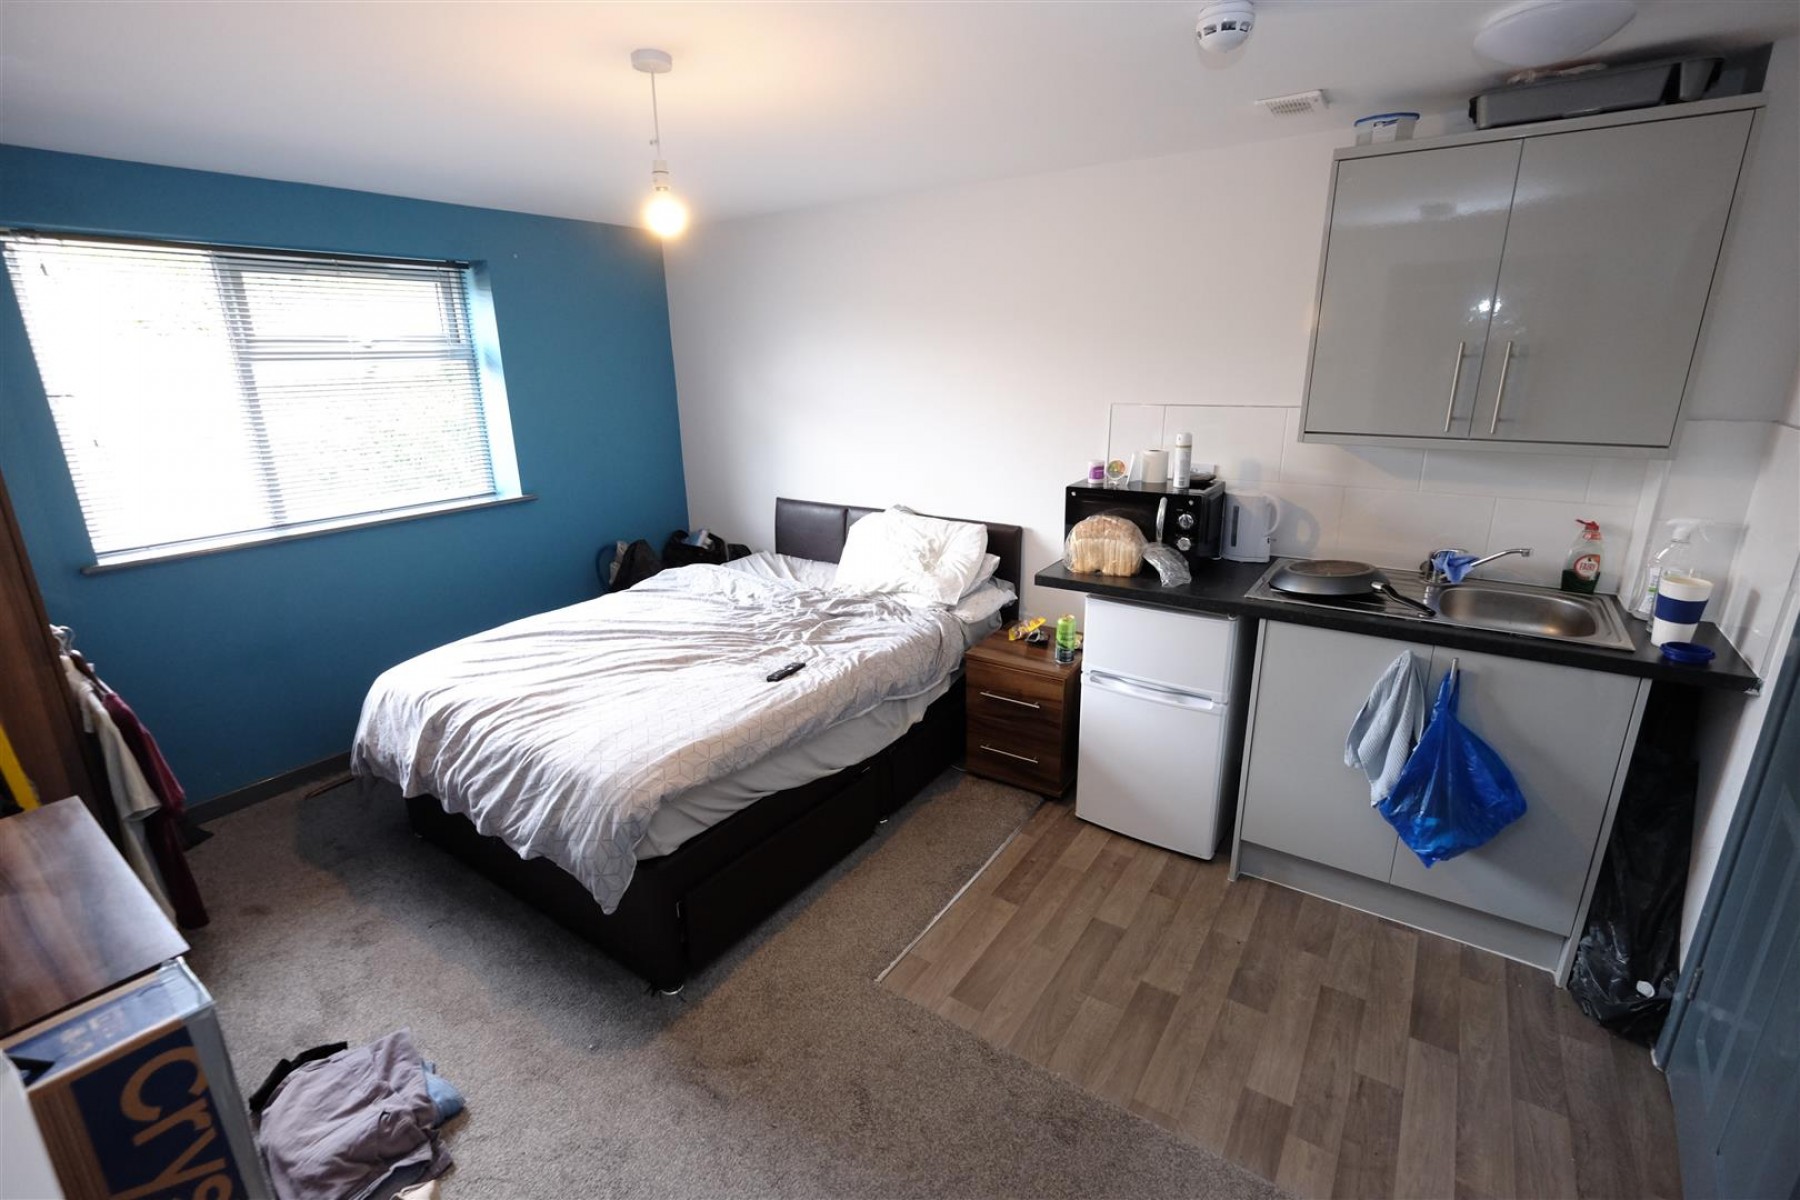 Images for 6 BED / 6 BATH HMO - £42K PA